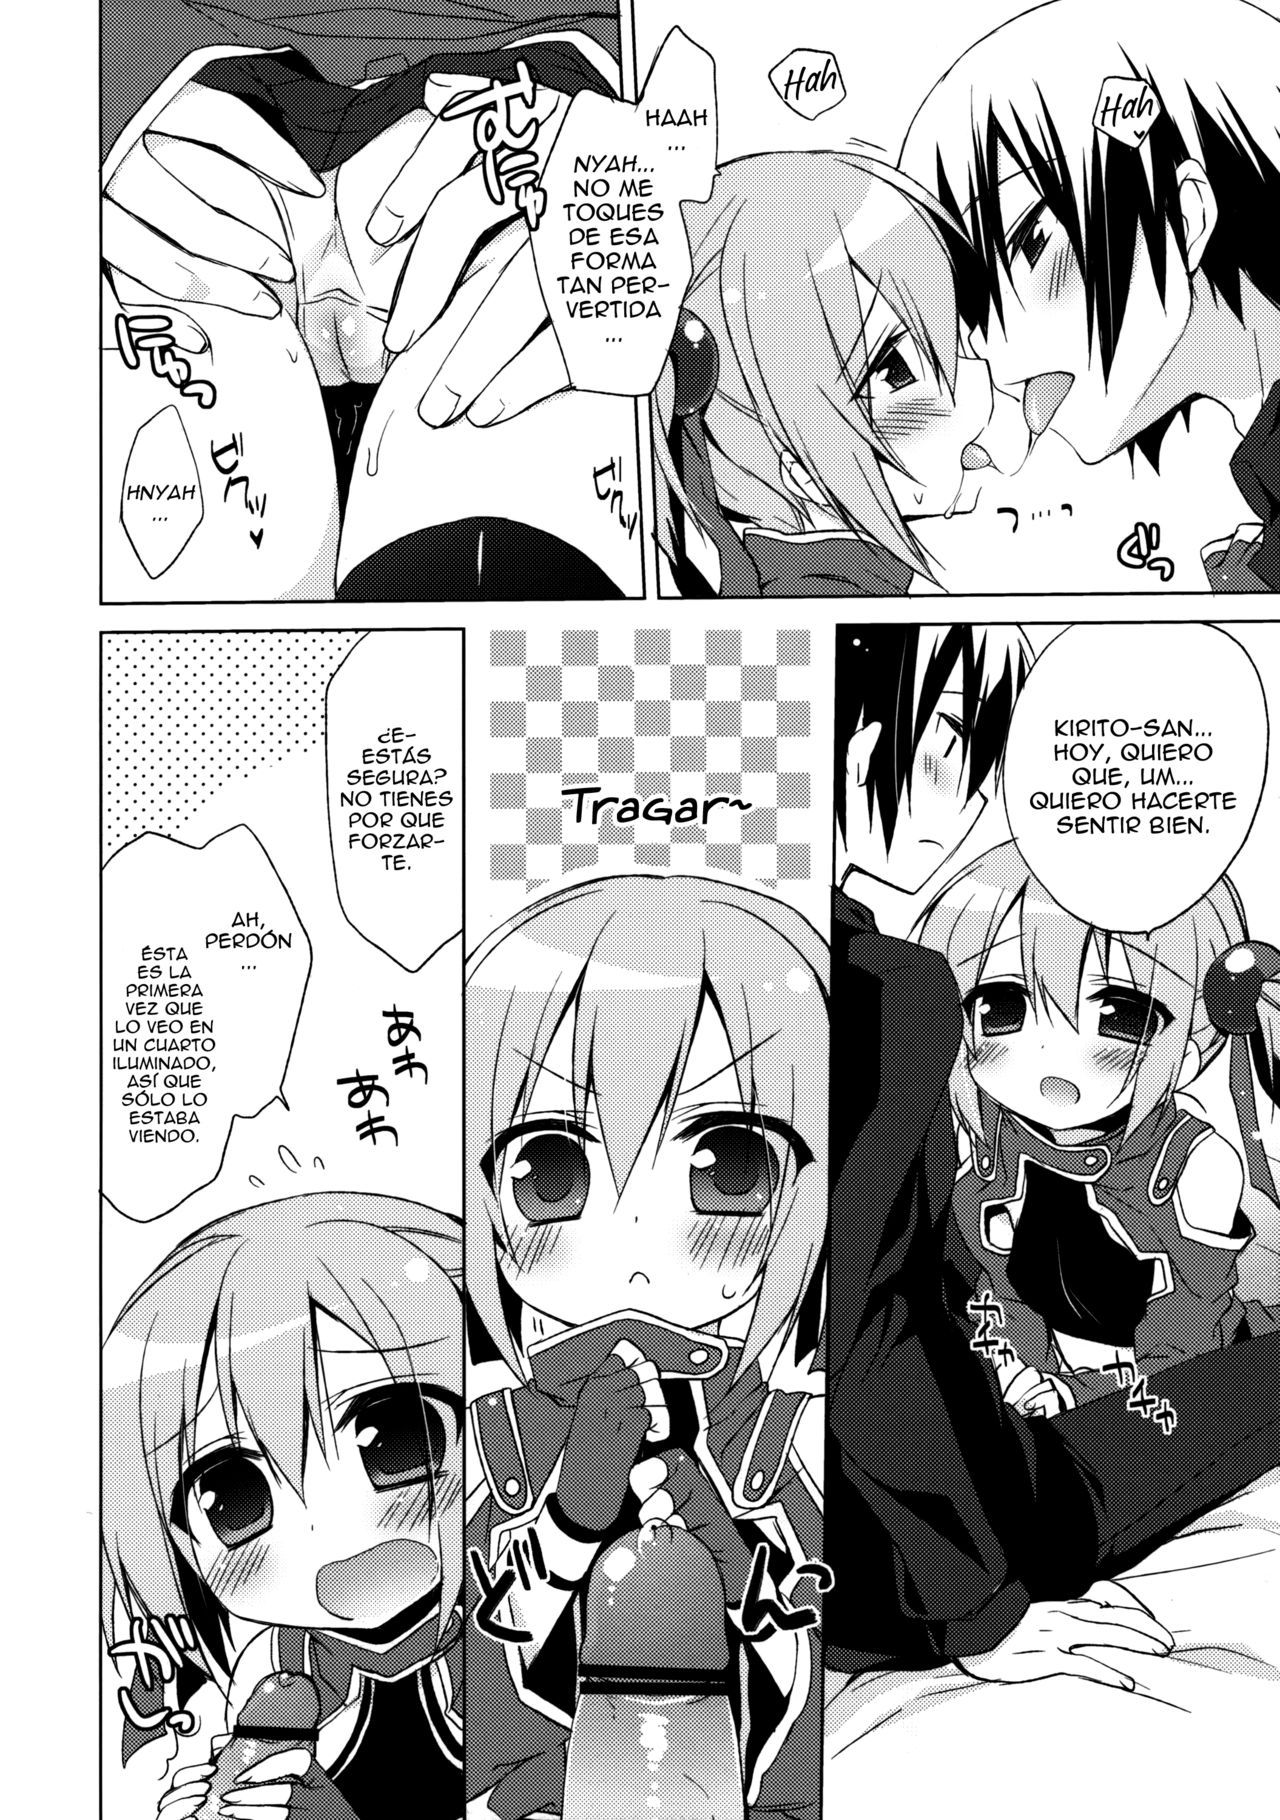 Sword Art Offline -Silica Route- - Page 7 - HentaiEra